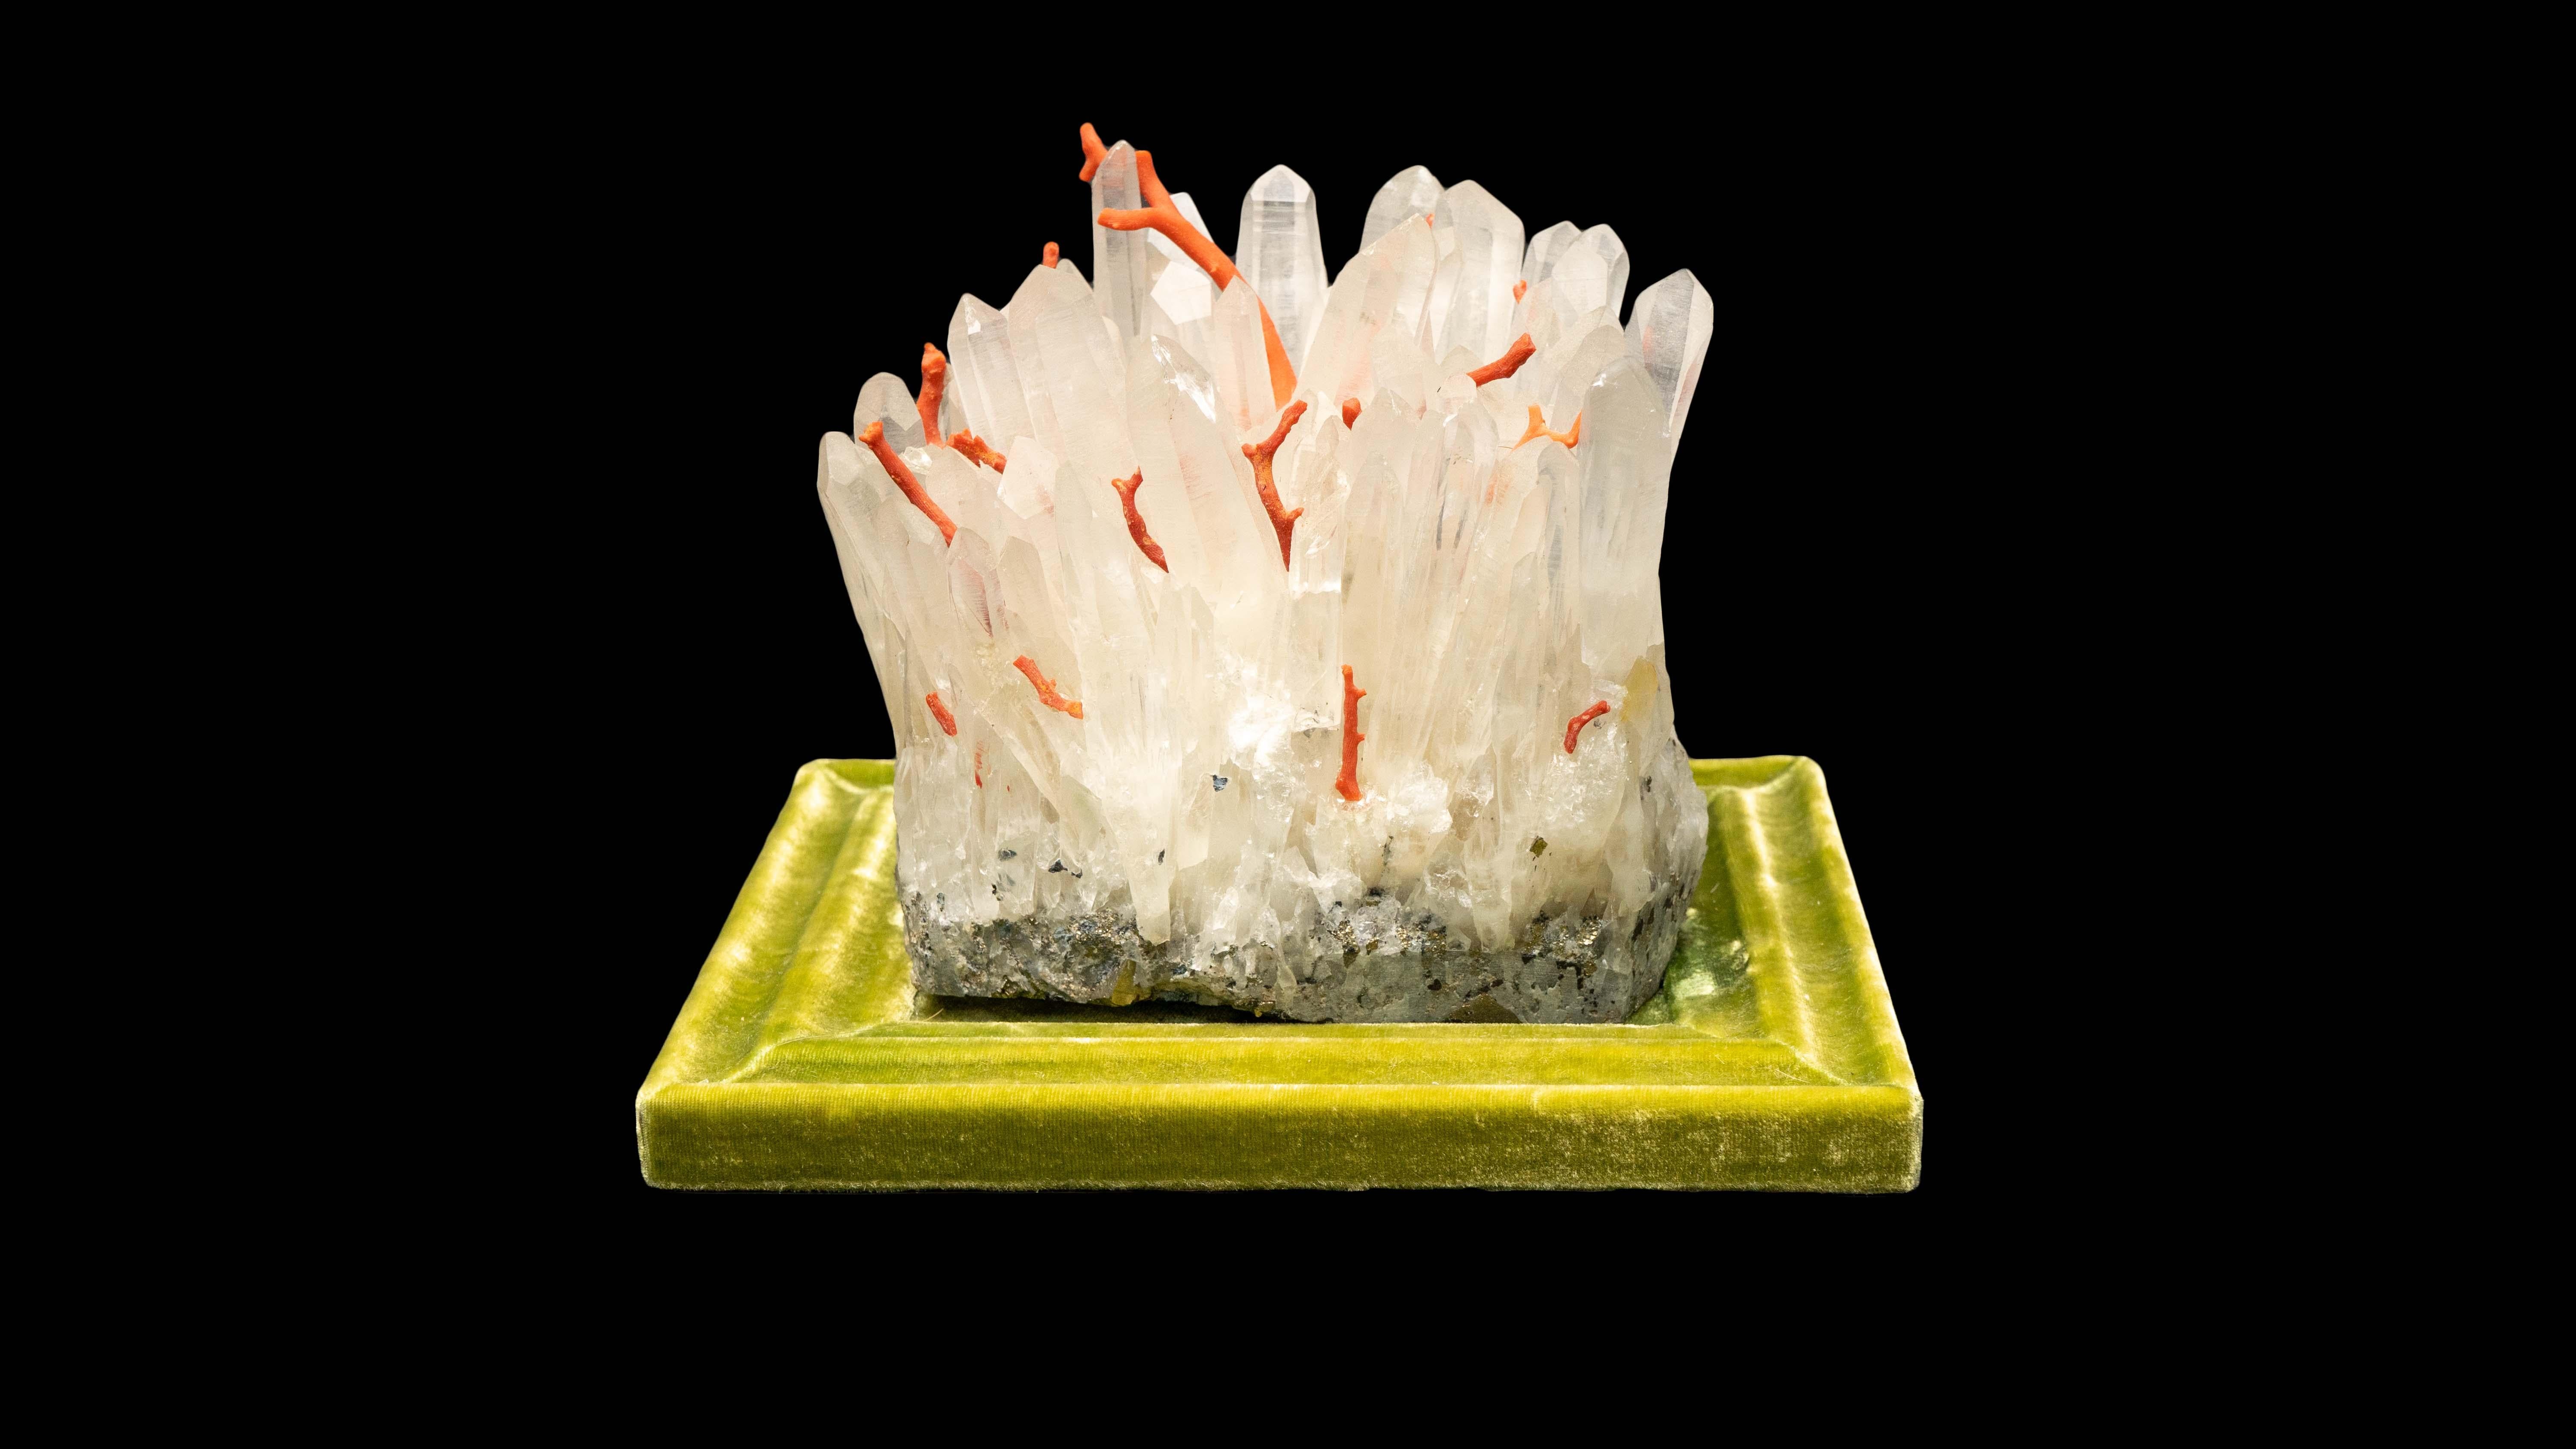 Mounted rock crystal & coral creation:

Measures: 6.5